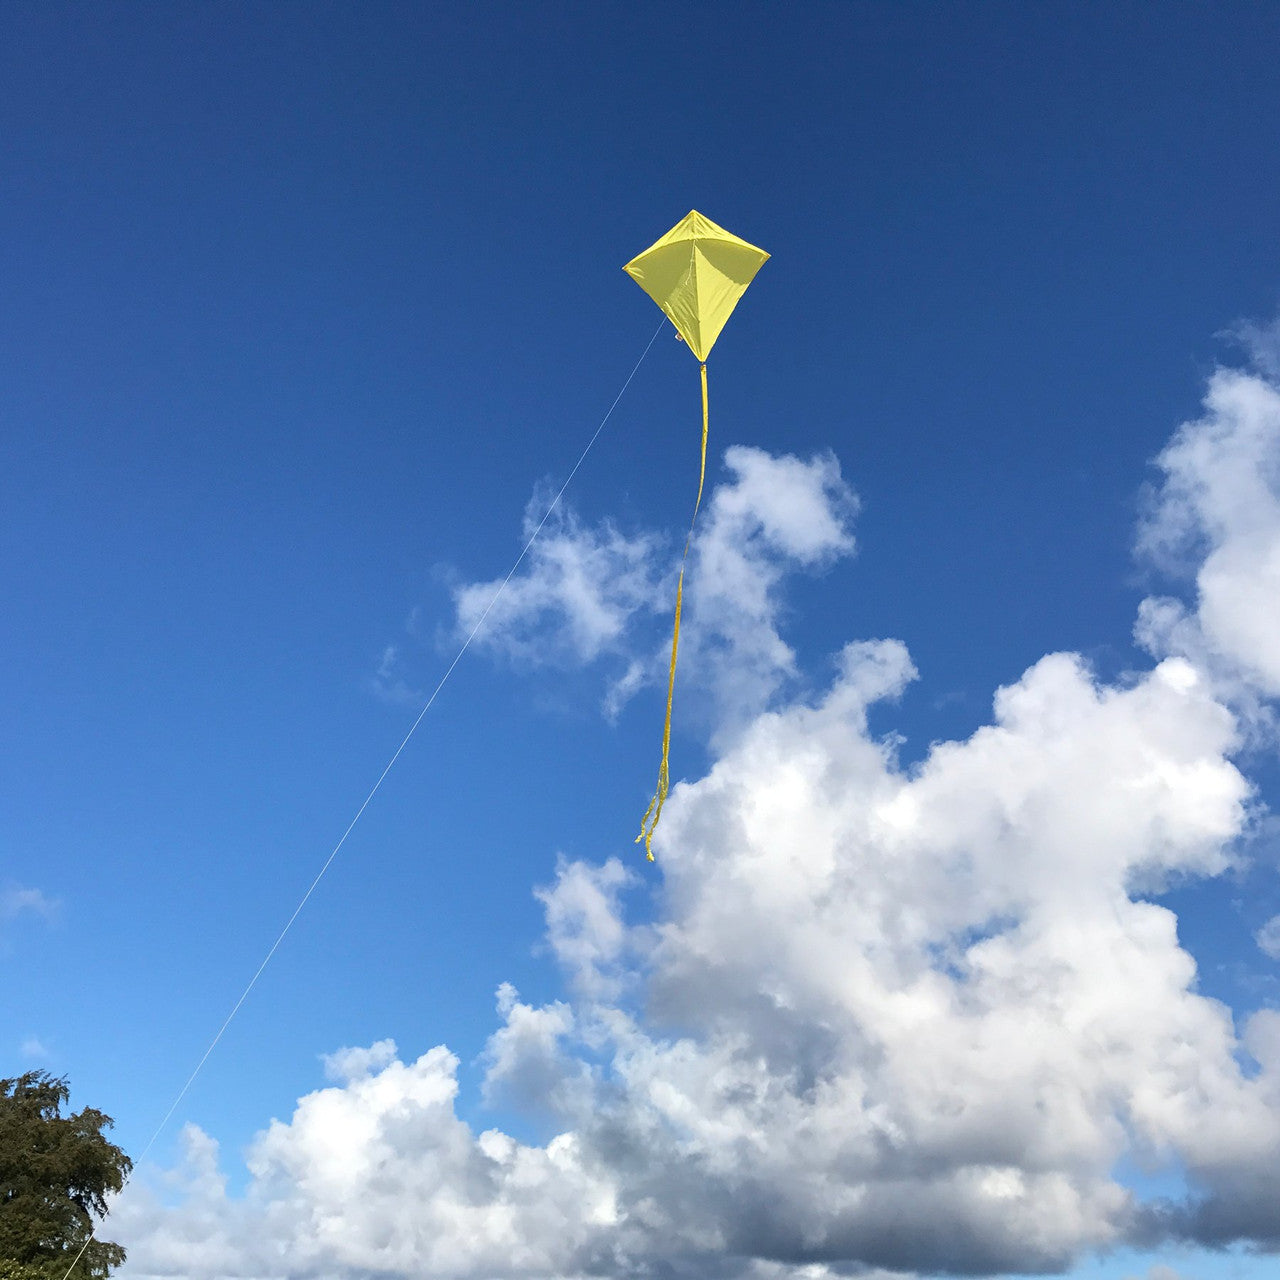 In the Breeze Yellow Colorfly 30" Diamond Kite